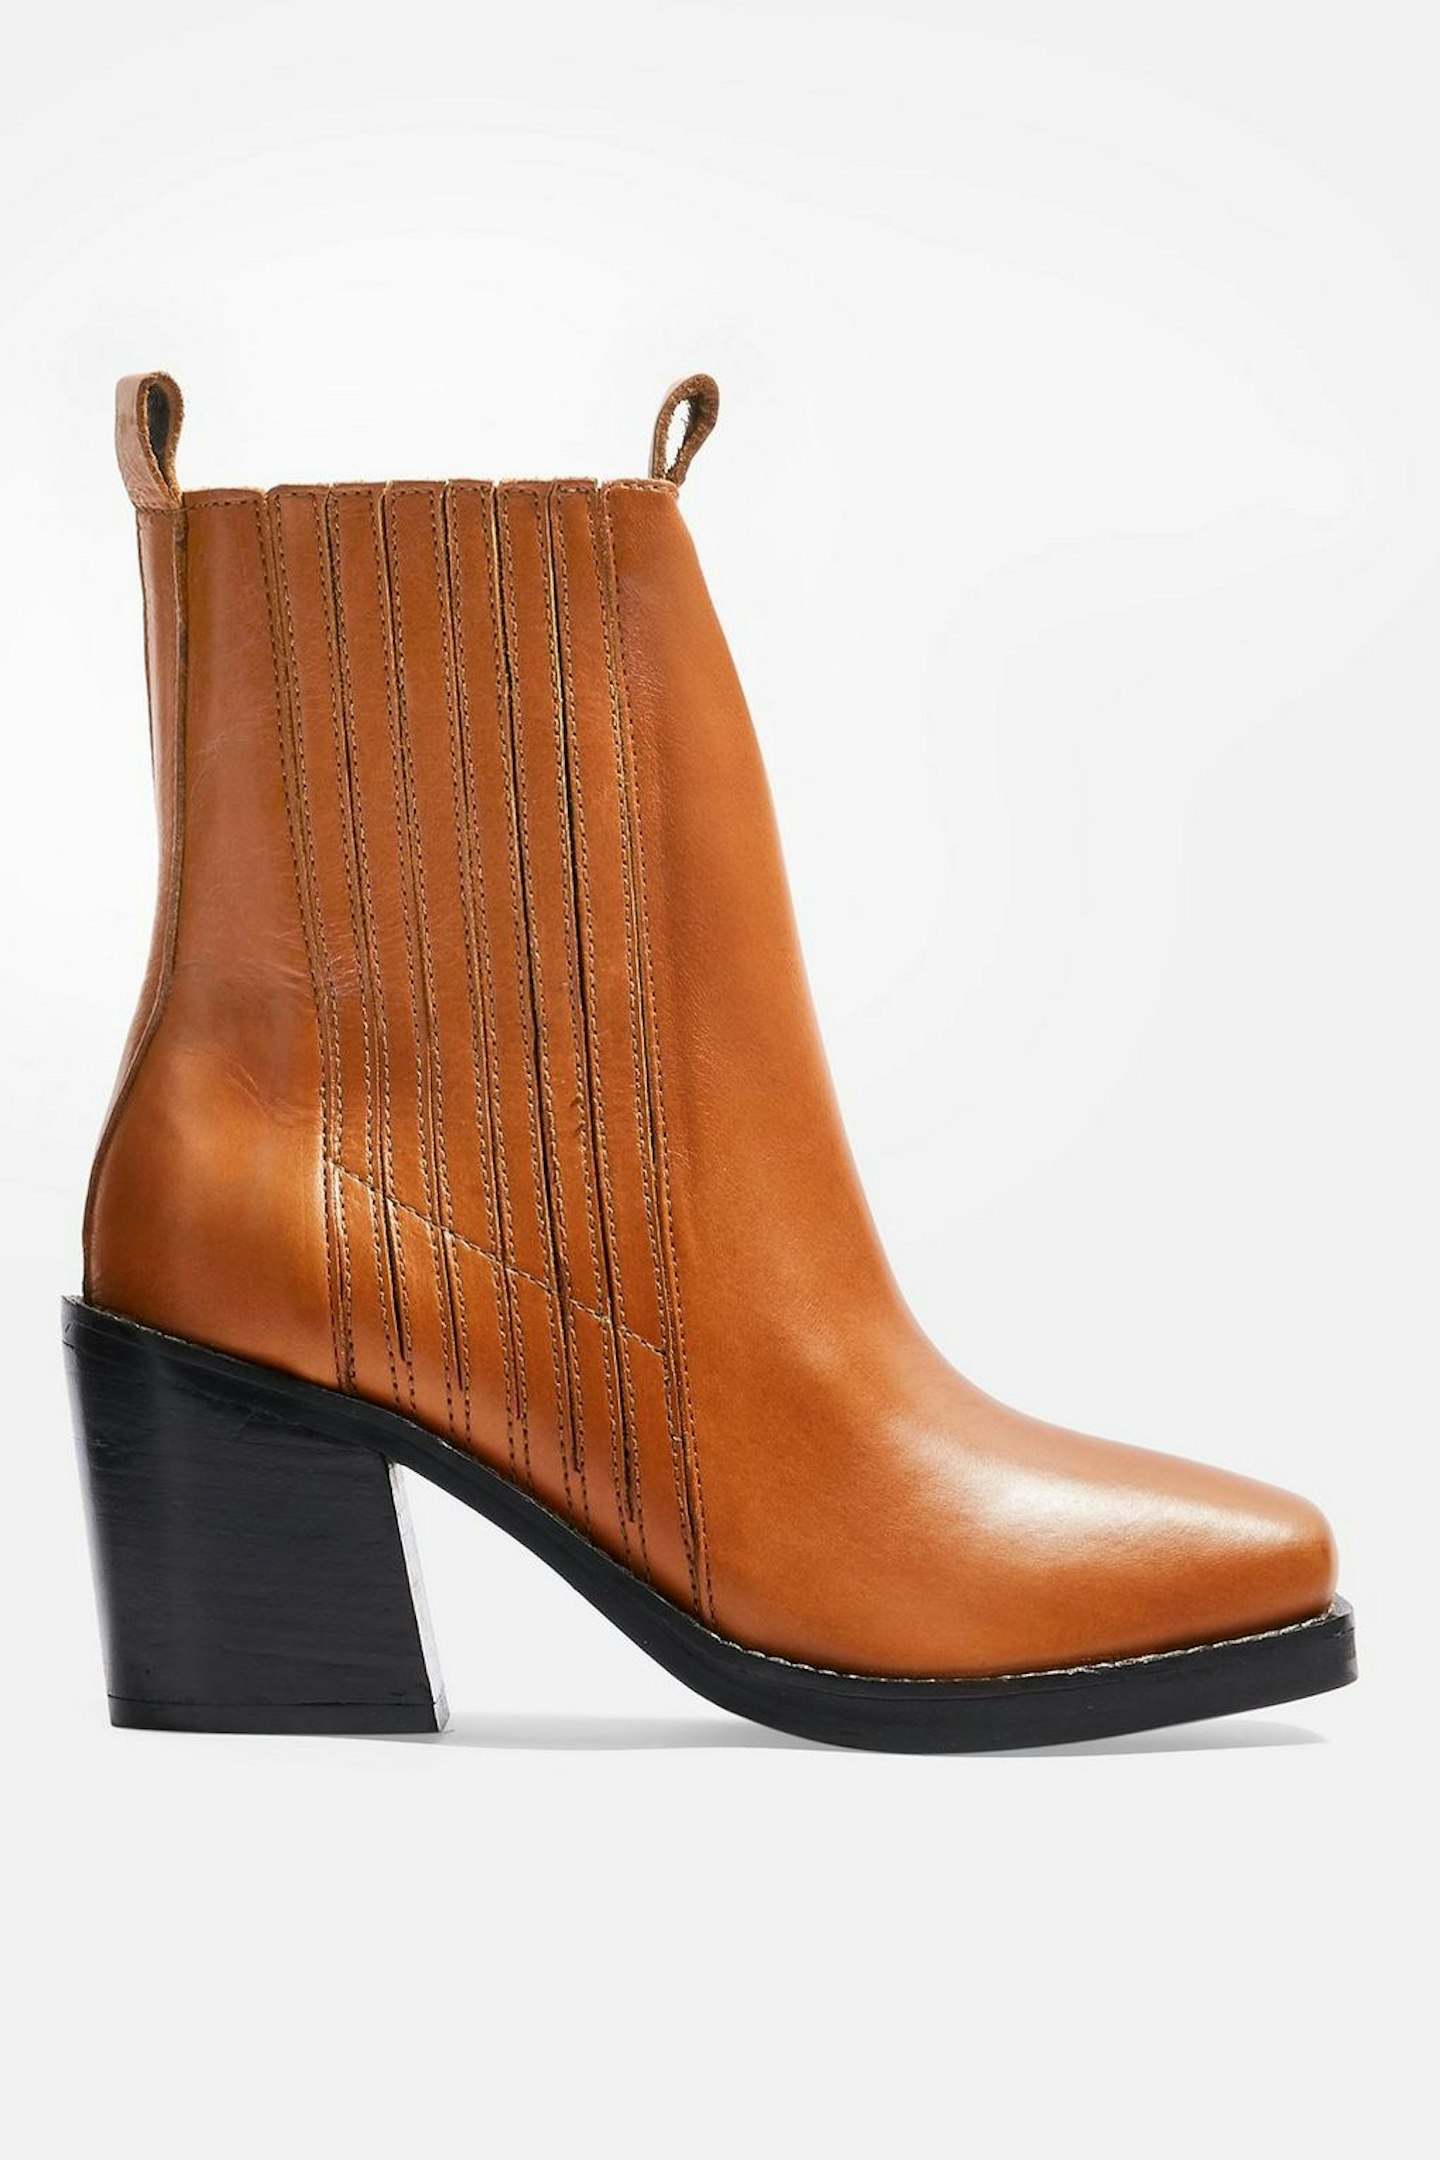 Topshop, Monty Square Toe Ankle Boots, £89